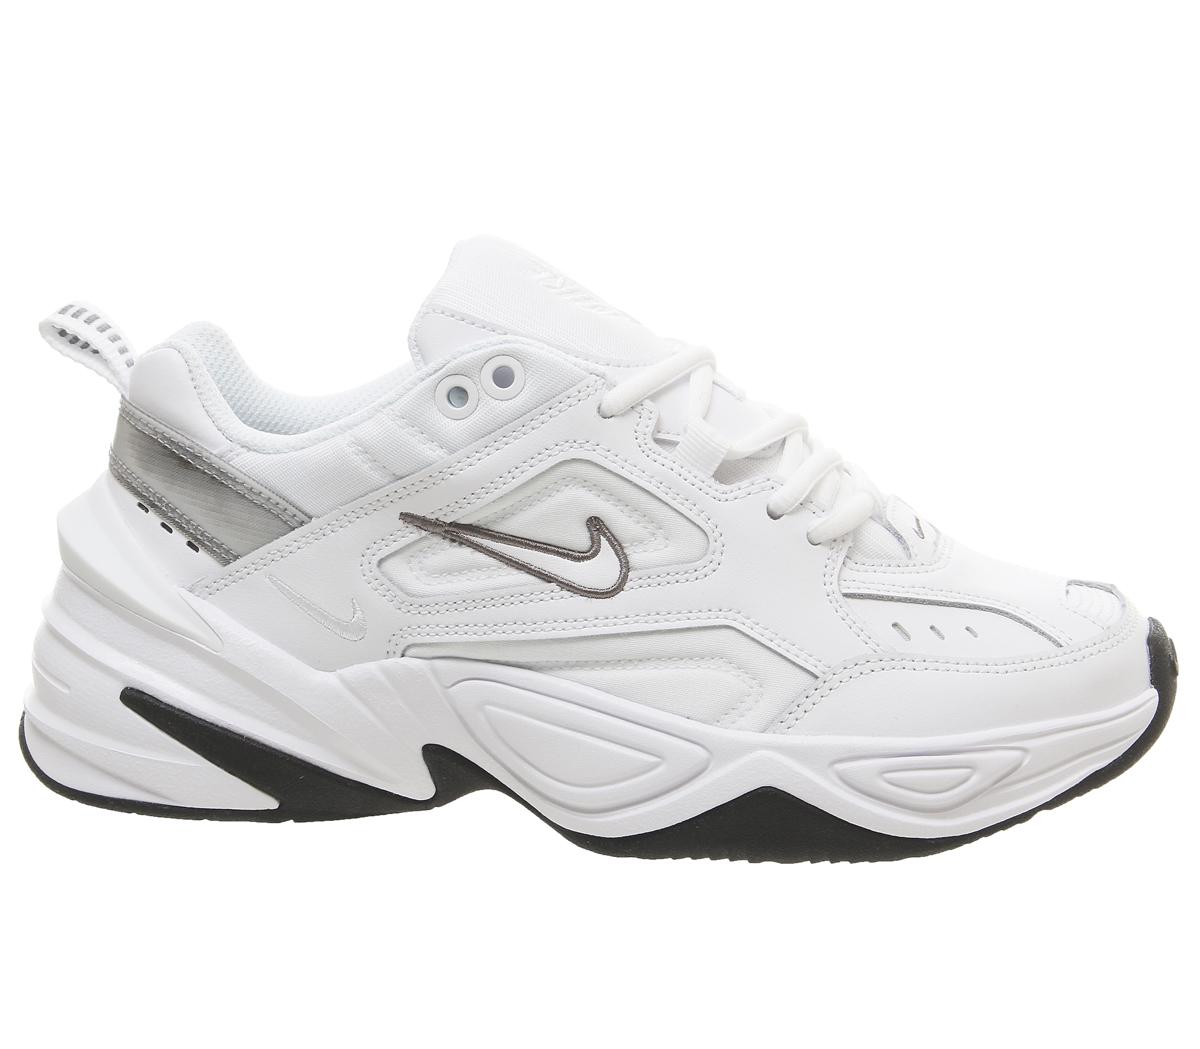  Nike  M2k  Tekno  Trainers White Cool Grey Black Hers trainers